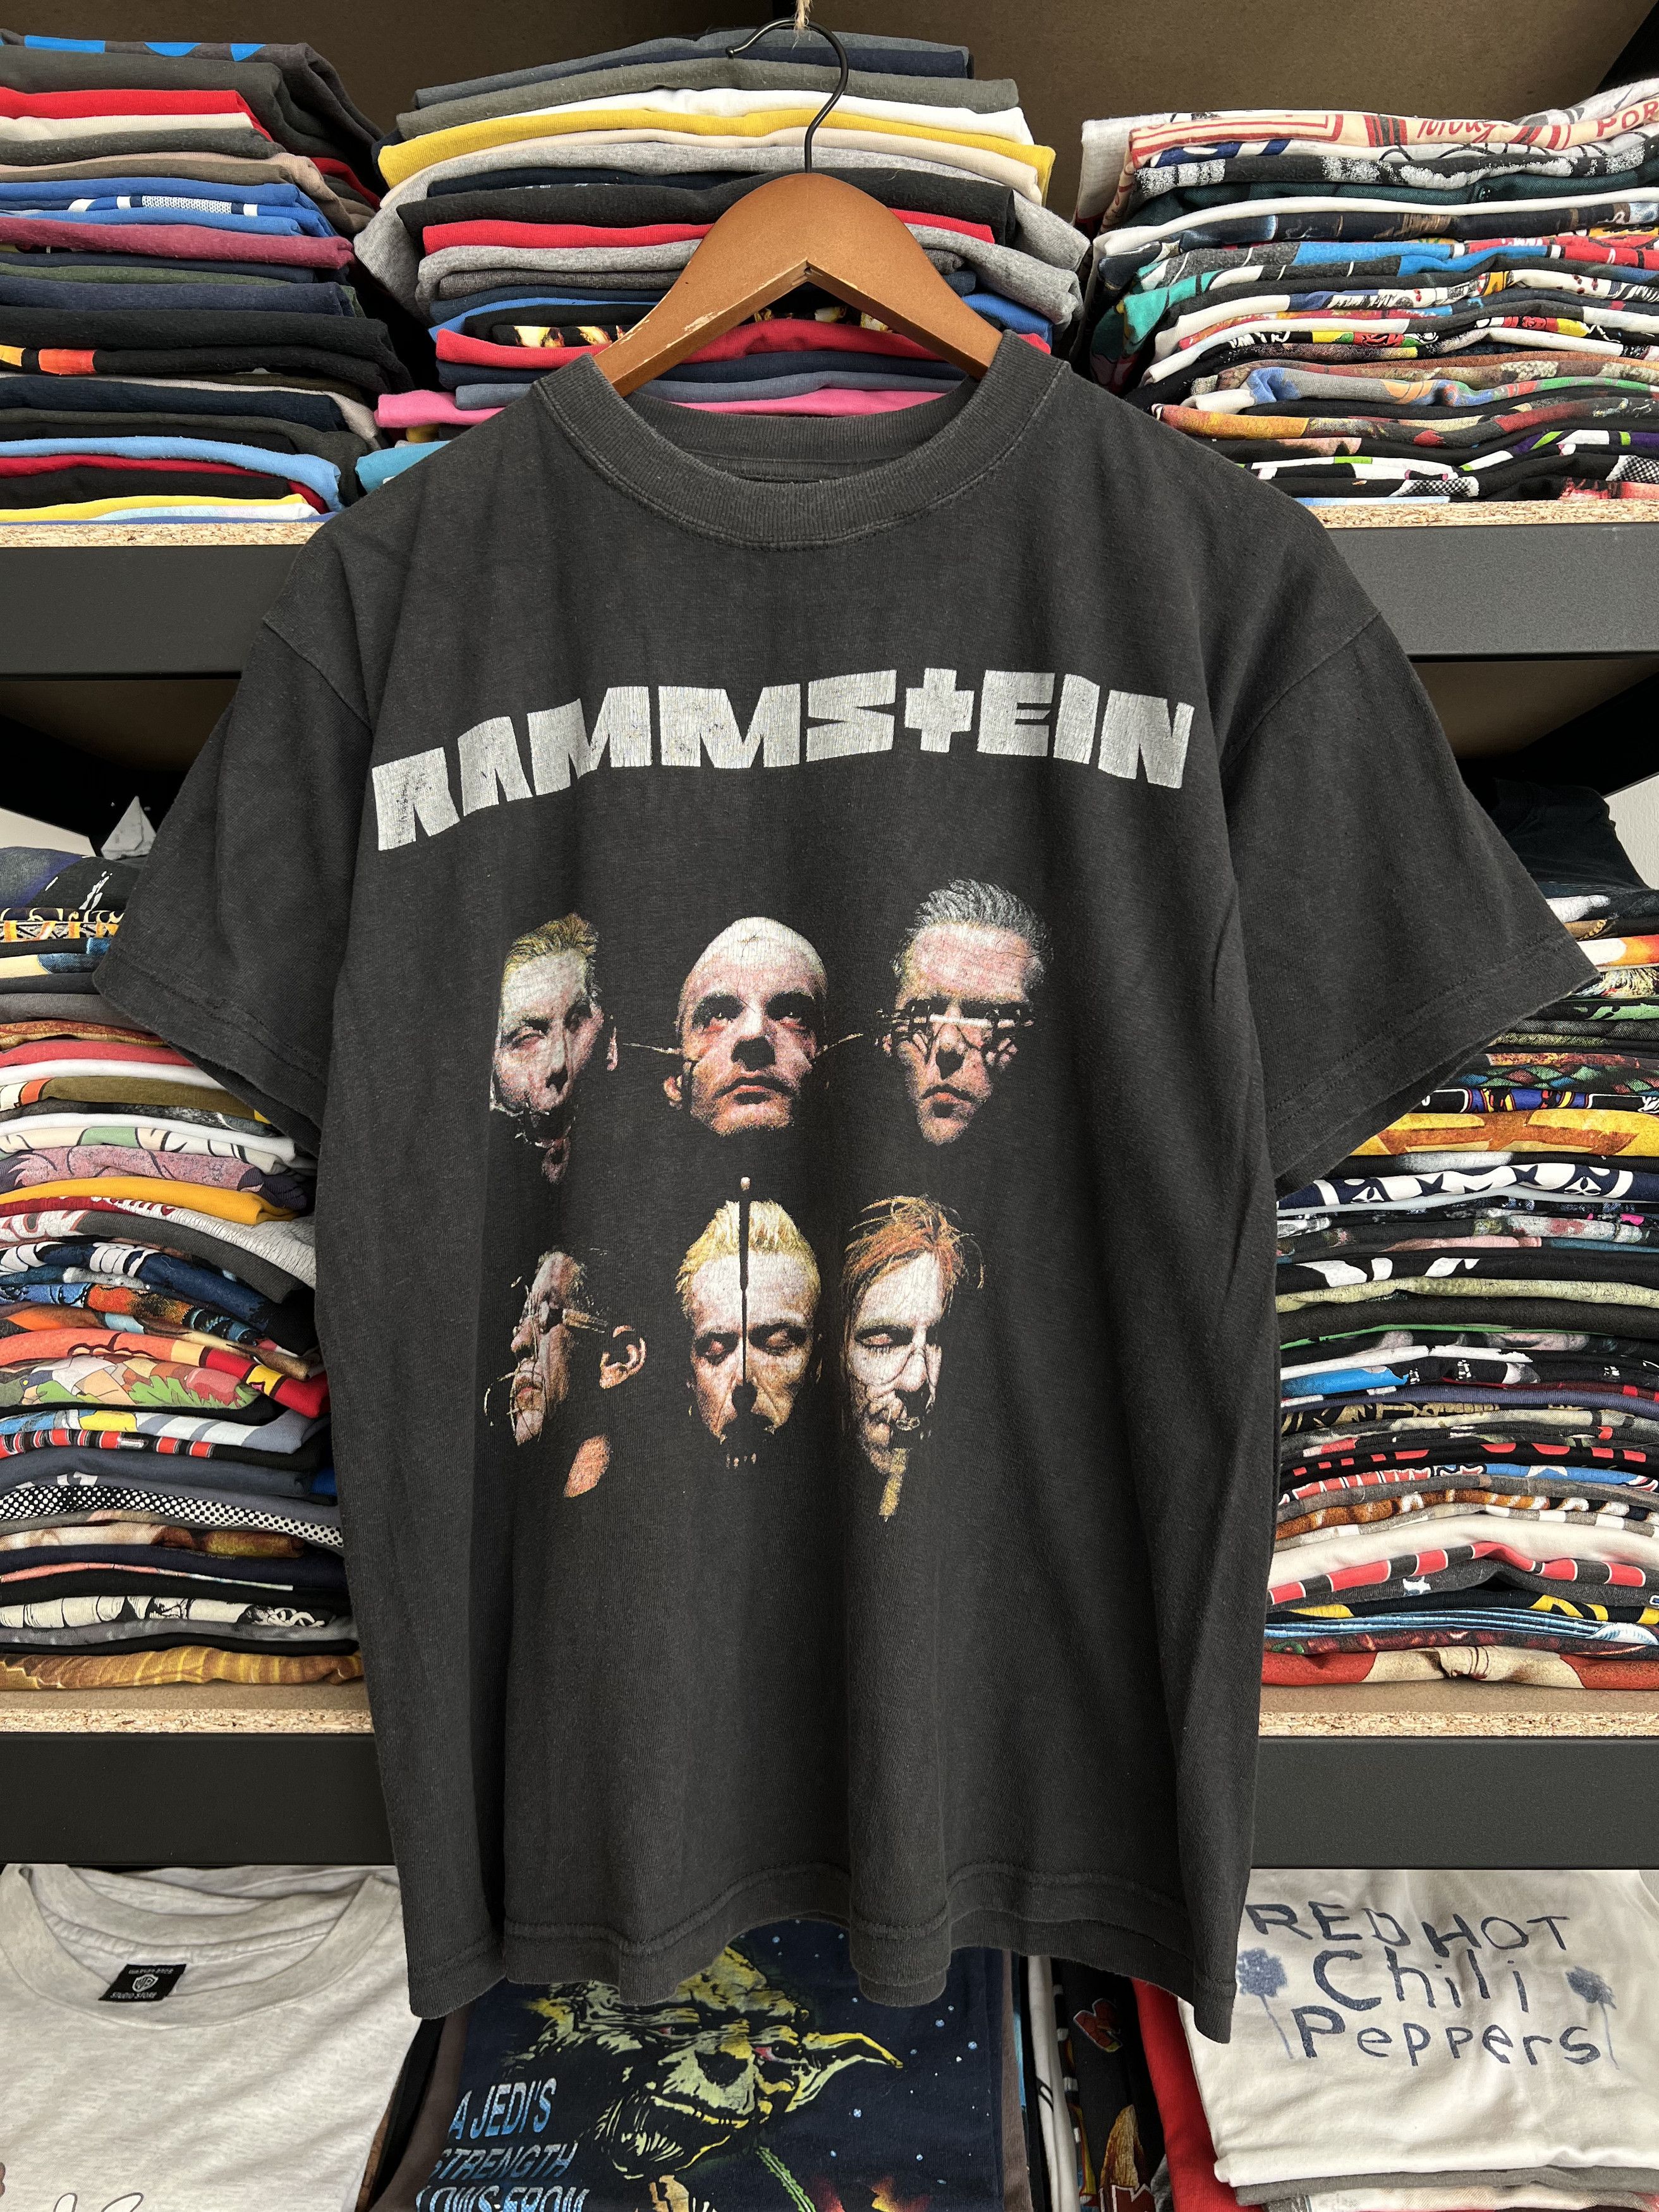 Vintage Rammstein Merch Sehsucht T-Shirt Faded 90s Rare Double Side